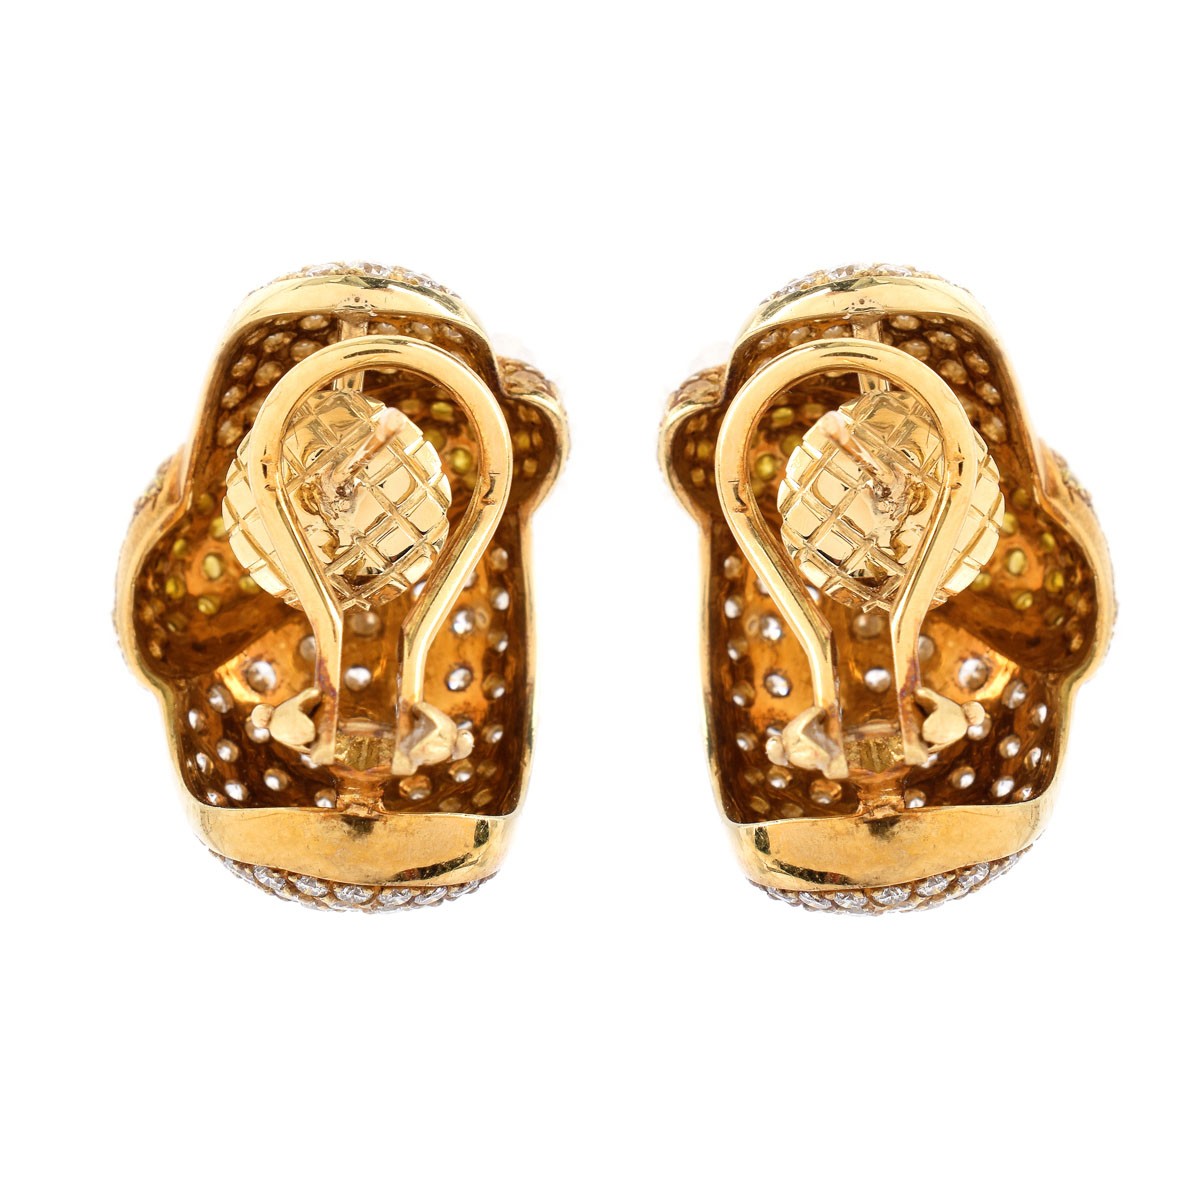 Approx. 9.0 Carat Pave Set Round Brilliant Cut Fancy Yellow and White Diamond and 18 Karat Yellow Gold Earrings.